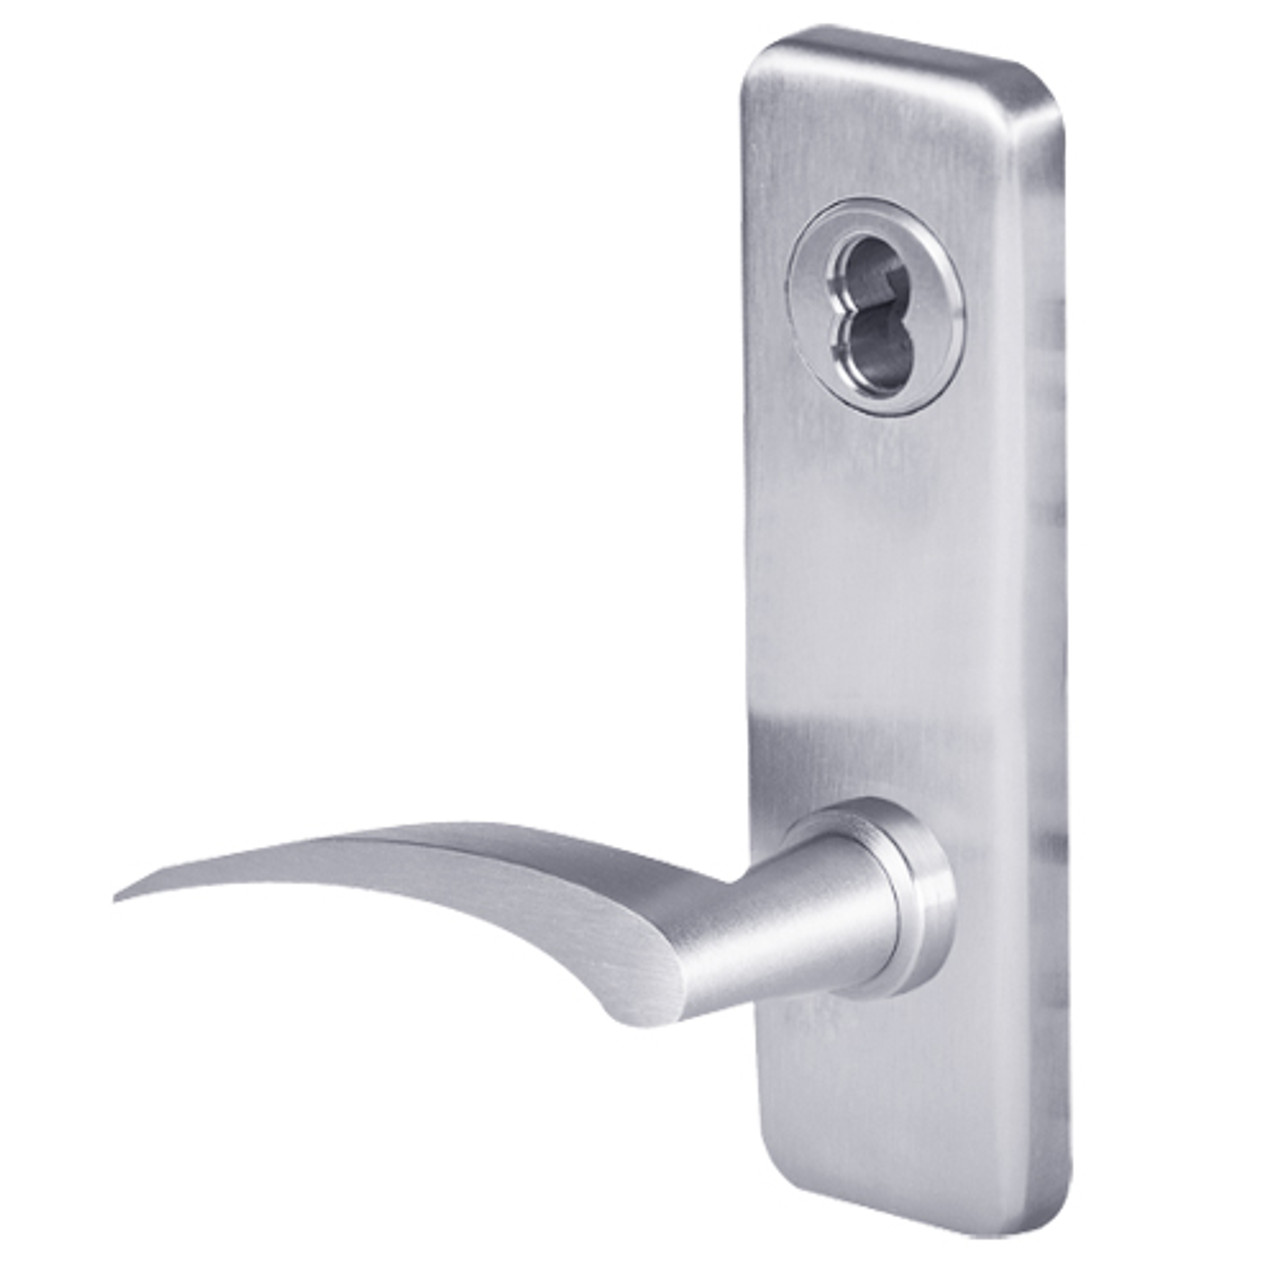 45H0LB17LJ626 Best 40H Series Privacy with Deadbolt Heavy Duty Mortise Lever Lock with Gull Wing LH in Satin Chrome